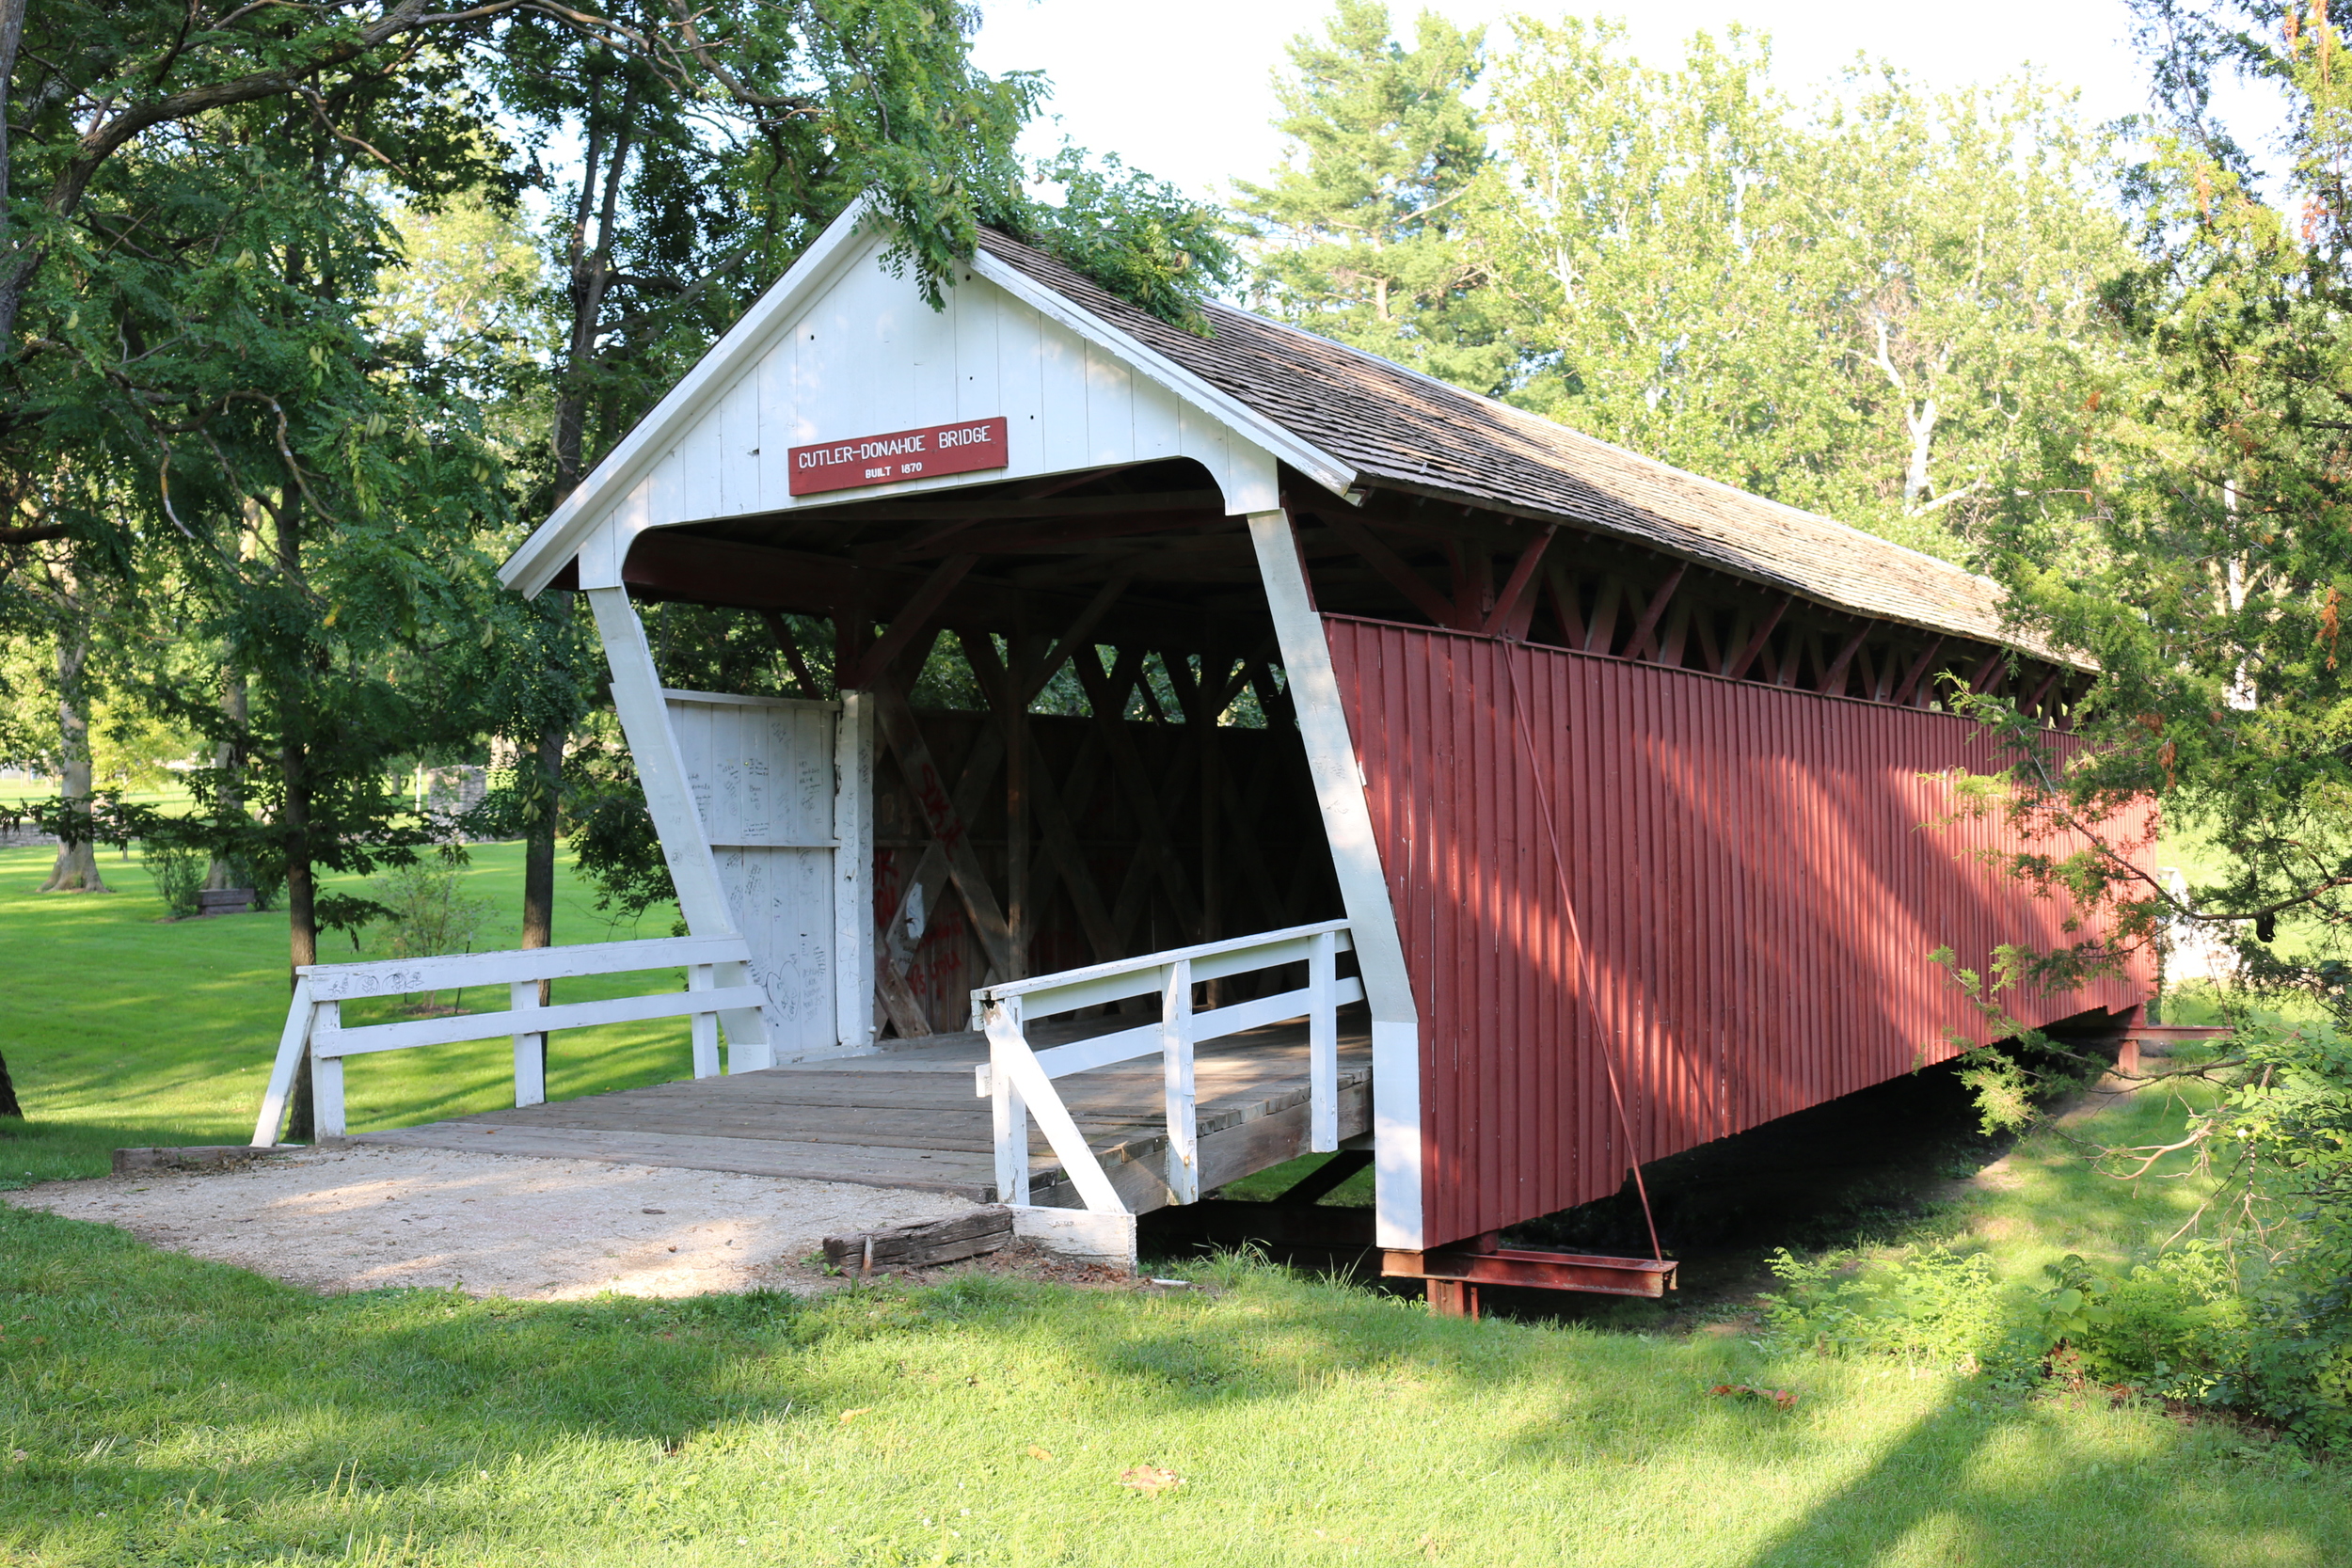 One of the remaining covered bridges in Madison County, IA.